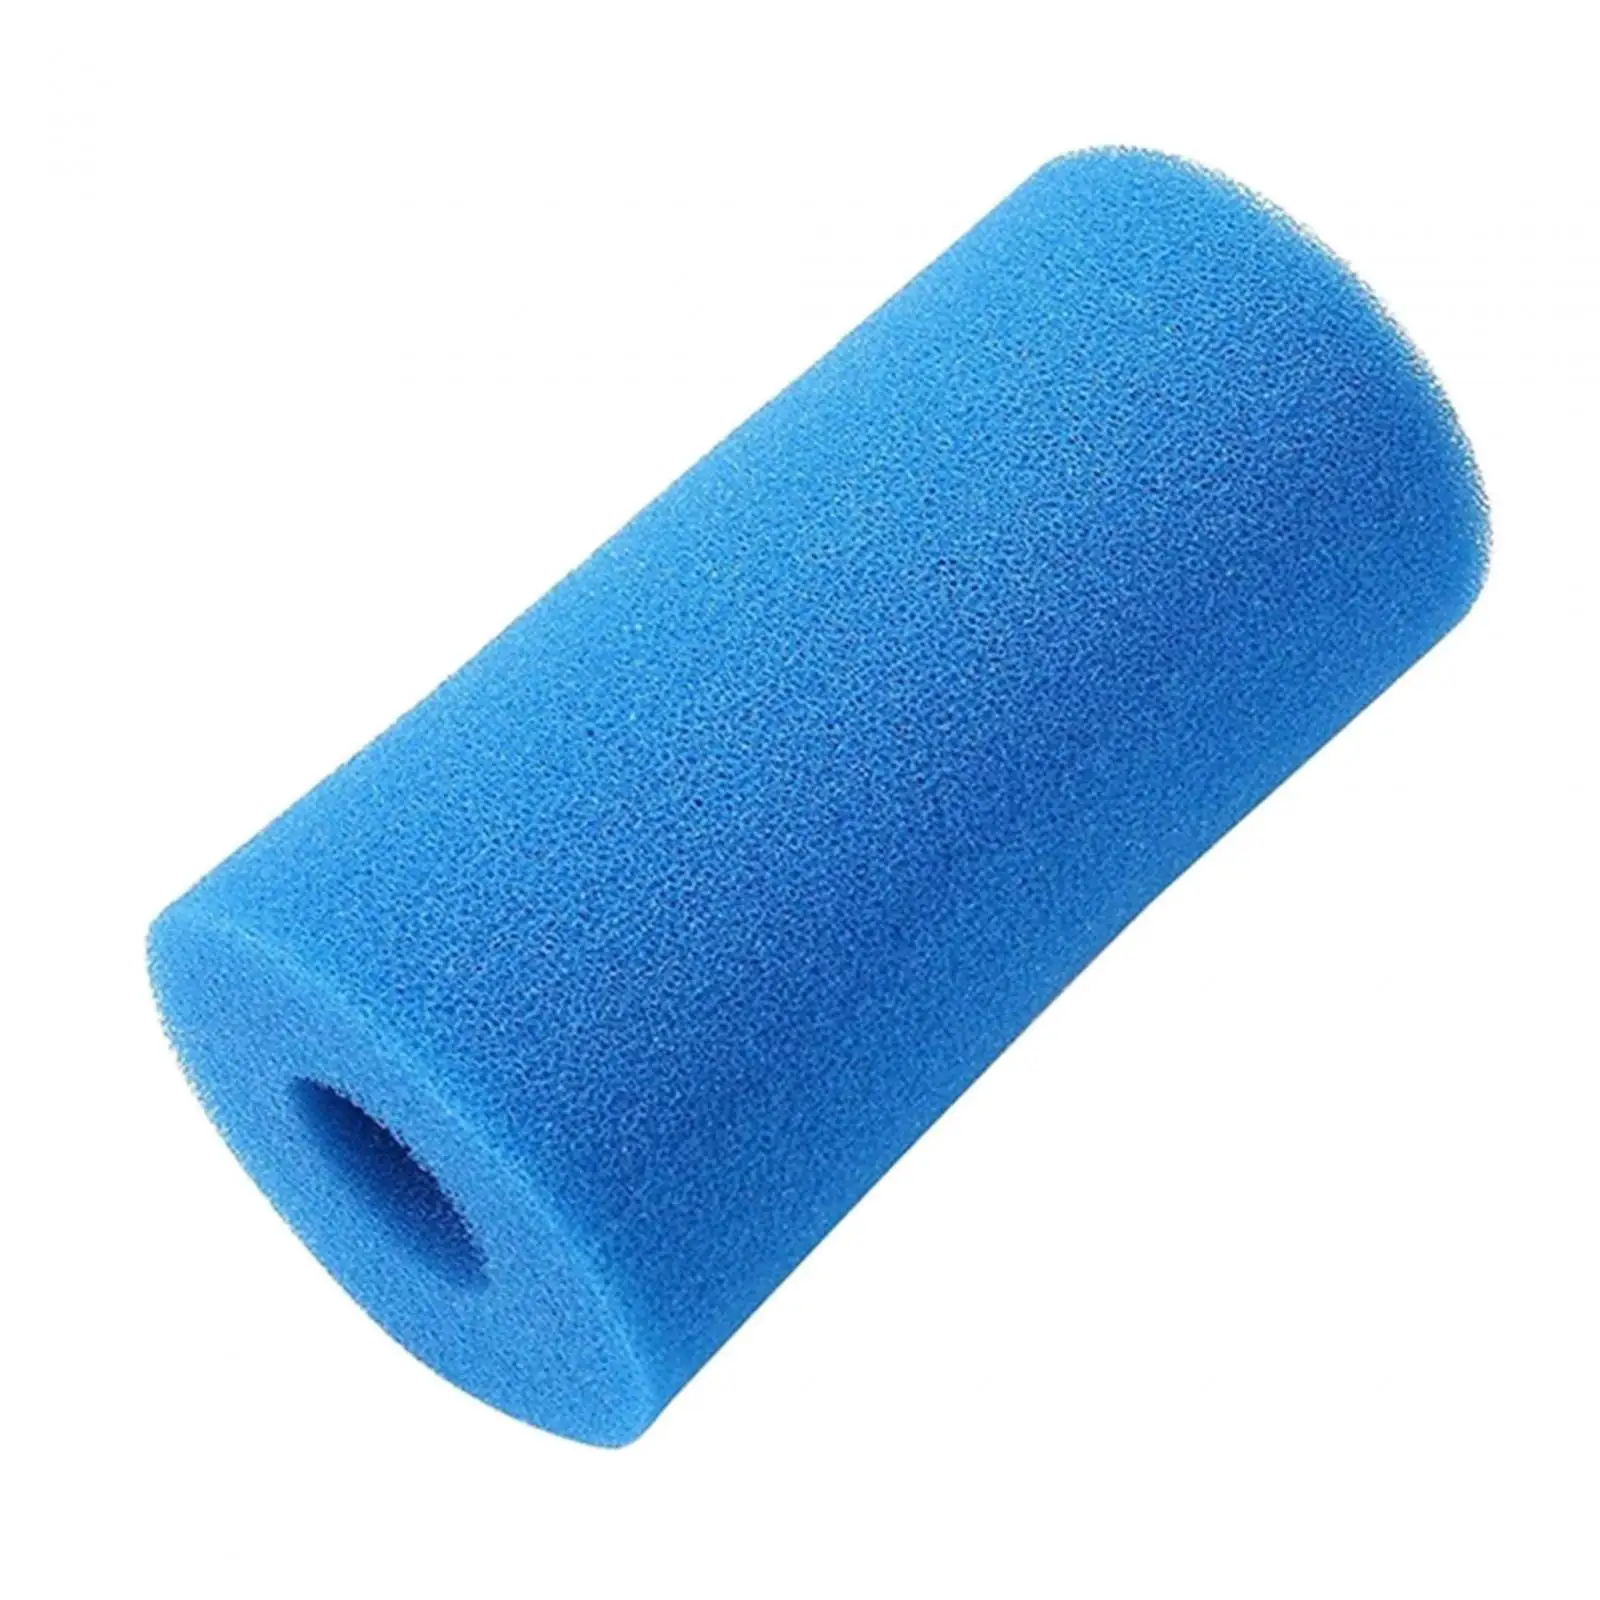 Pool Filter Cartridge Washable Durable Pool Filter Sponge Cleaner Replace Parts